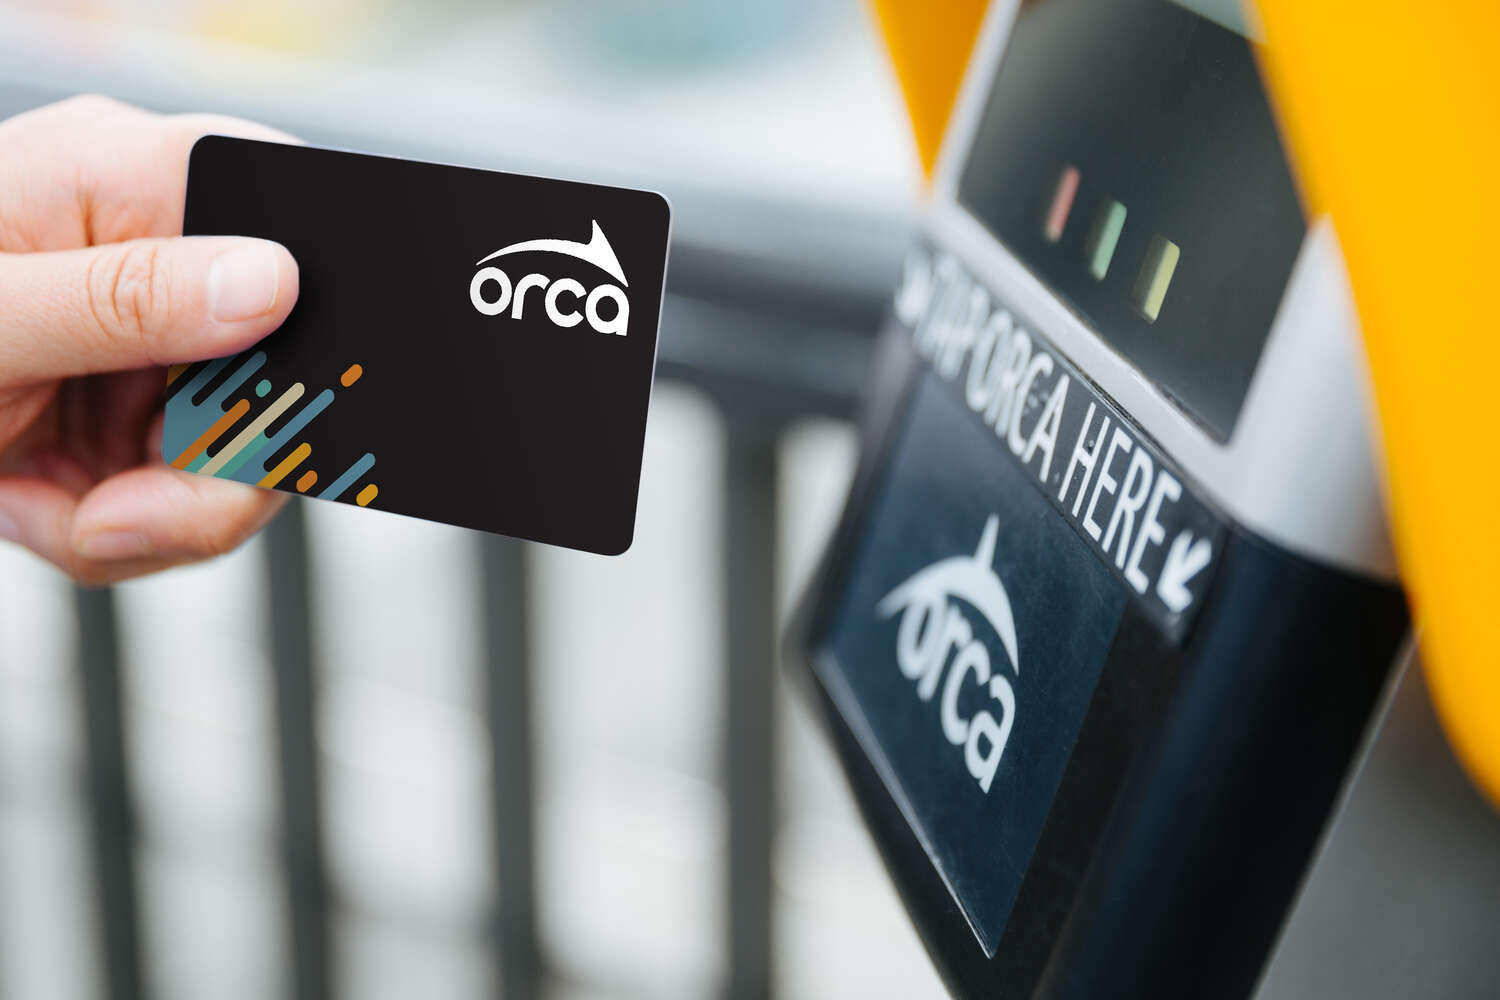 Rider uses ORCA card to board a bus